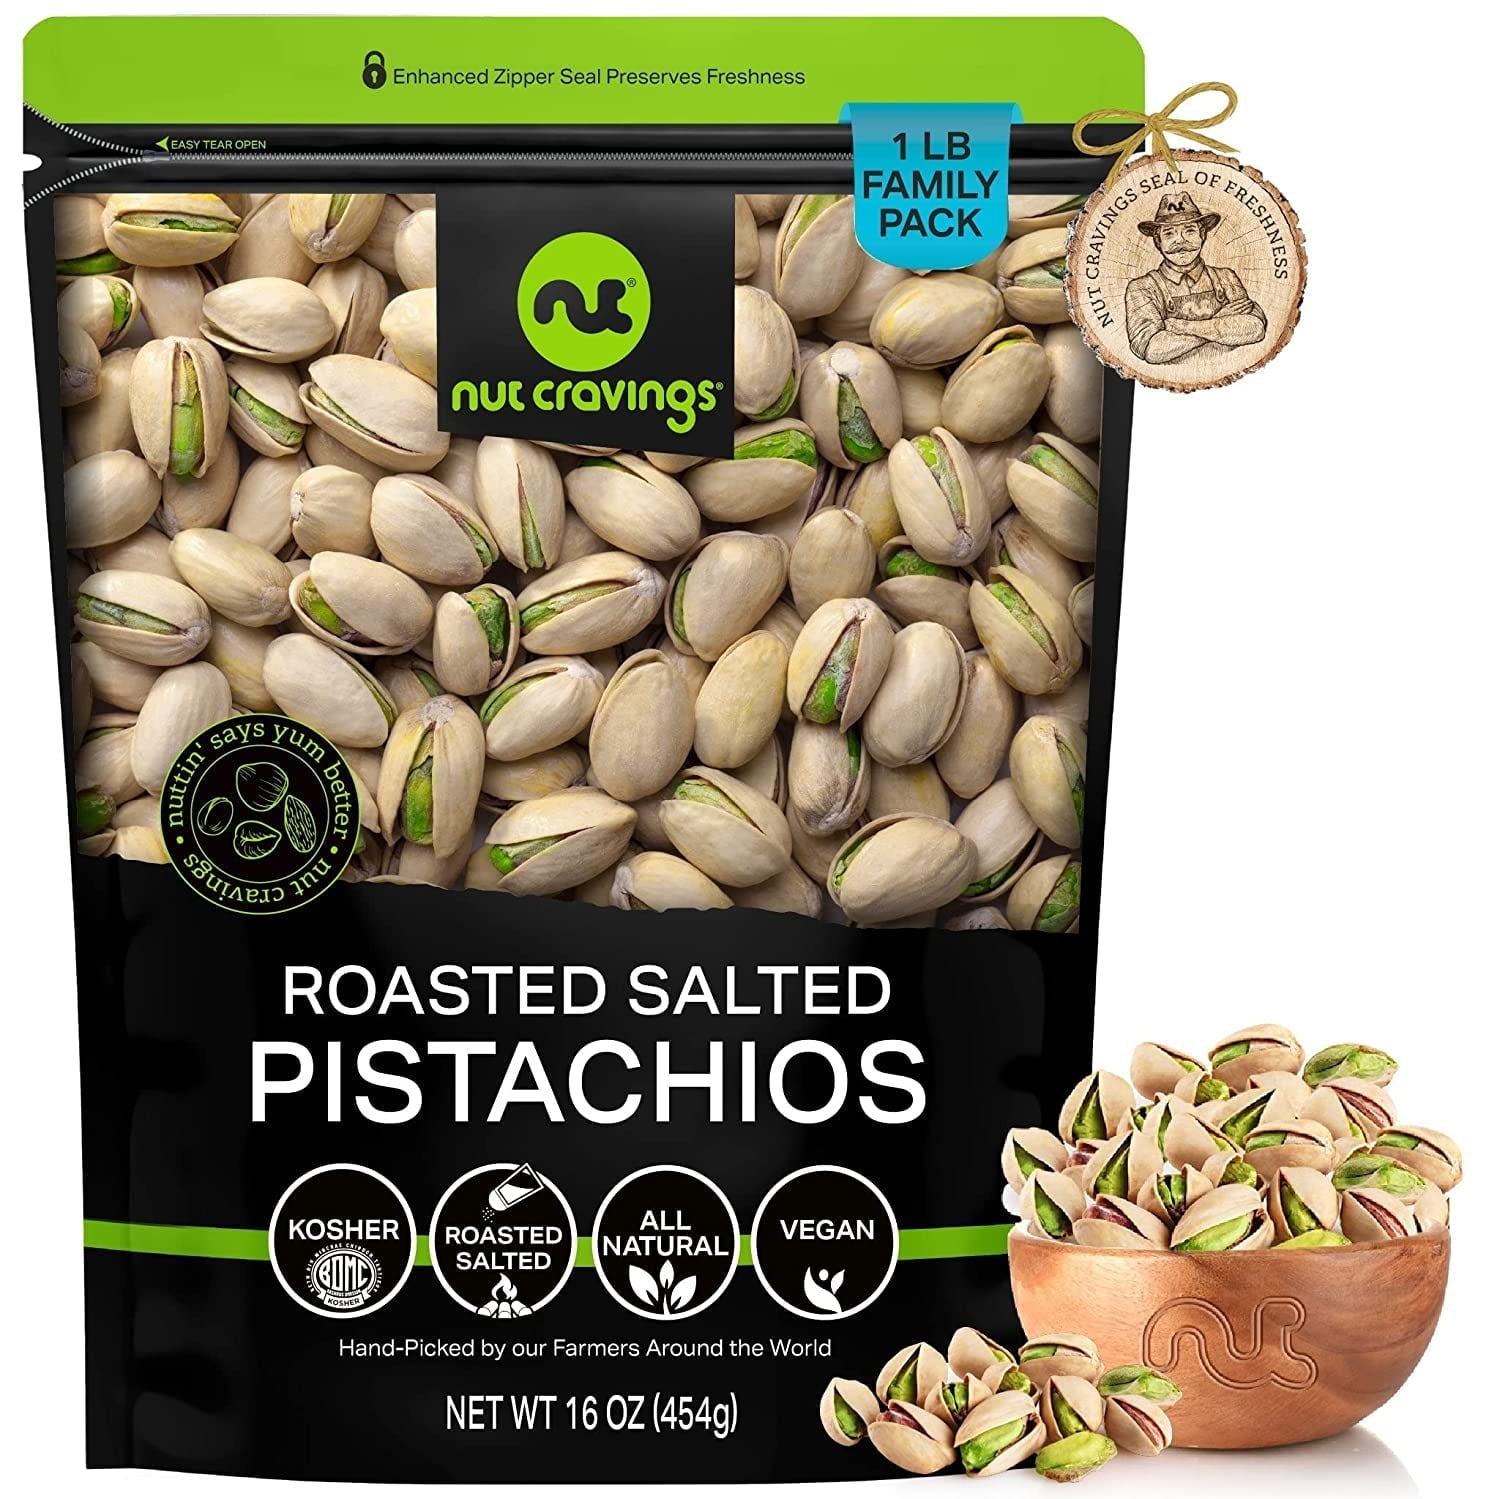 Wholesale prices with free shipping all over United States Freshly Roasted & Salted California Pistachios (16oz - 1 LB) Packed Fresh in Resealable Bag - Steven Deals